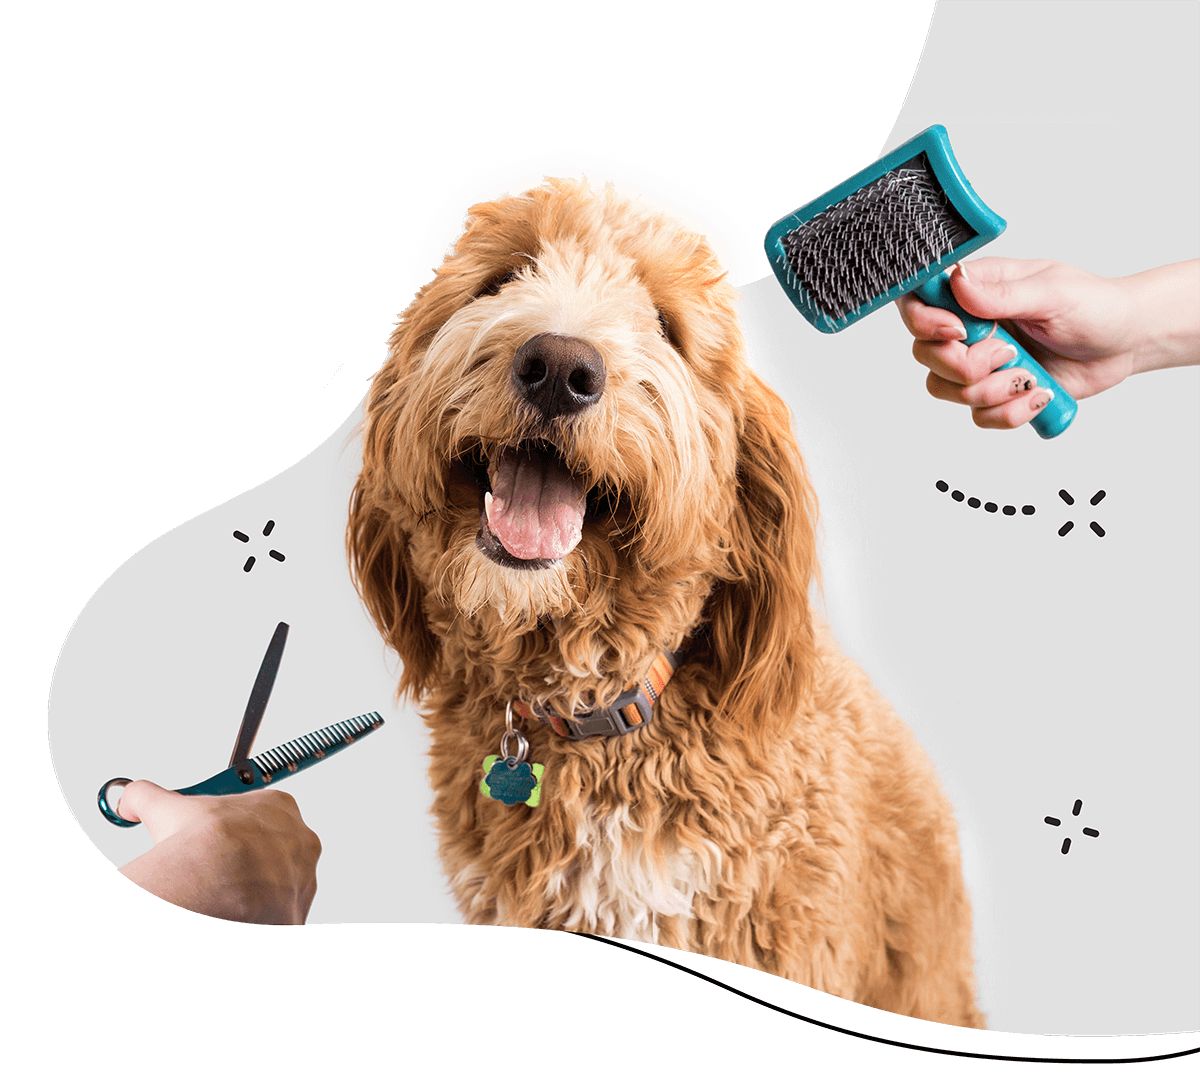 How long does it take to groom a dog? How can you groom a dog quickly?